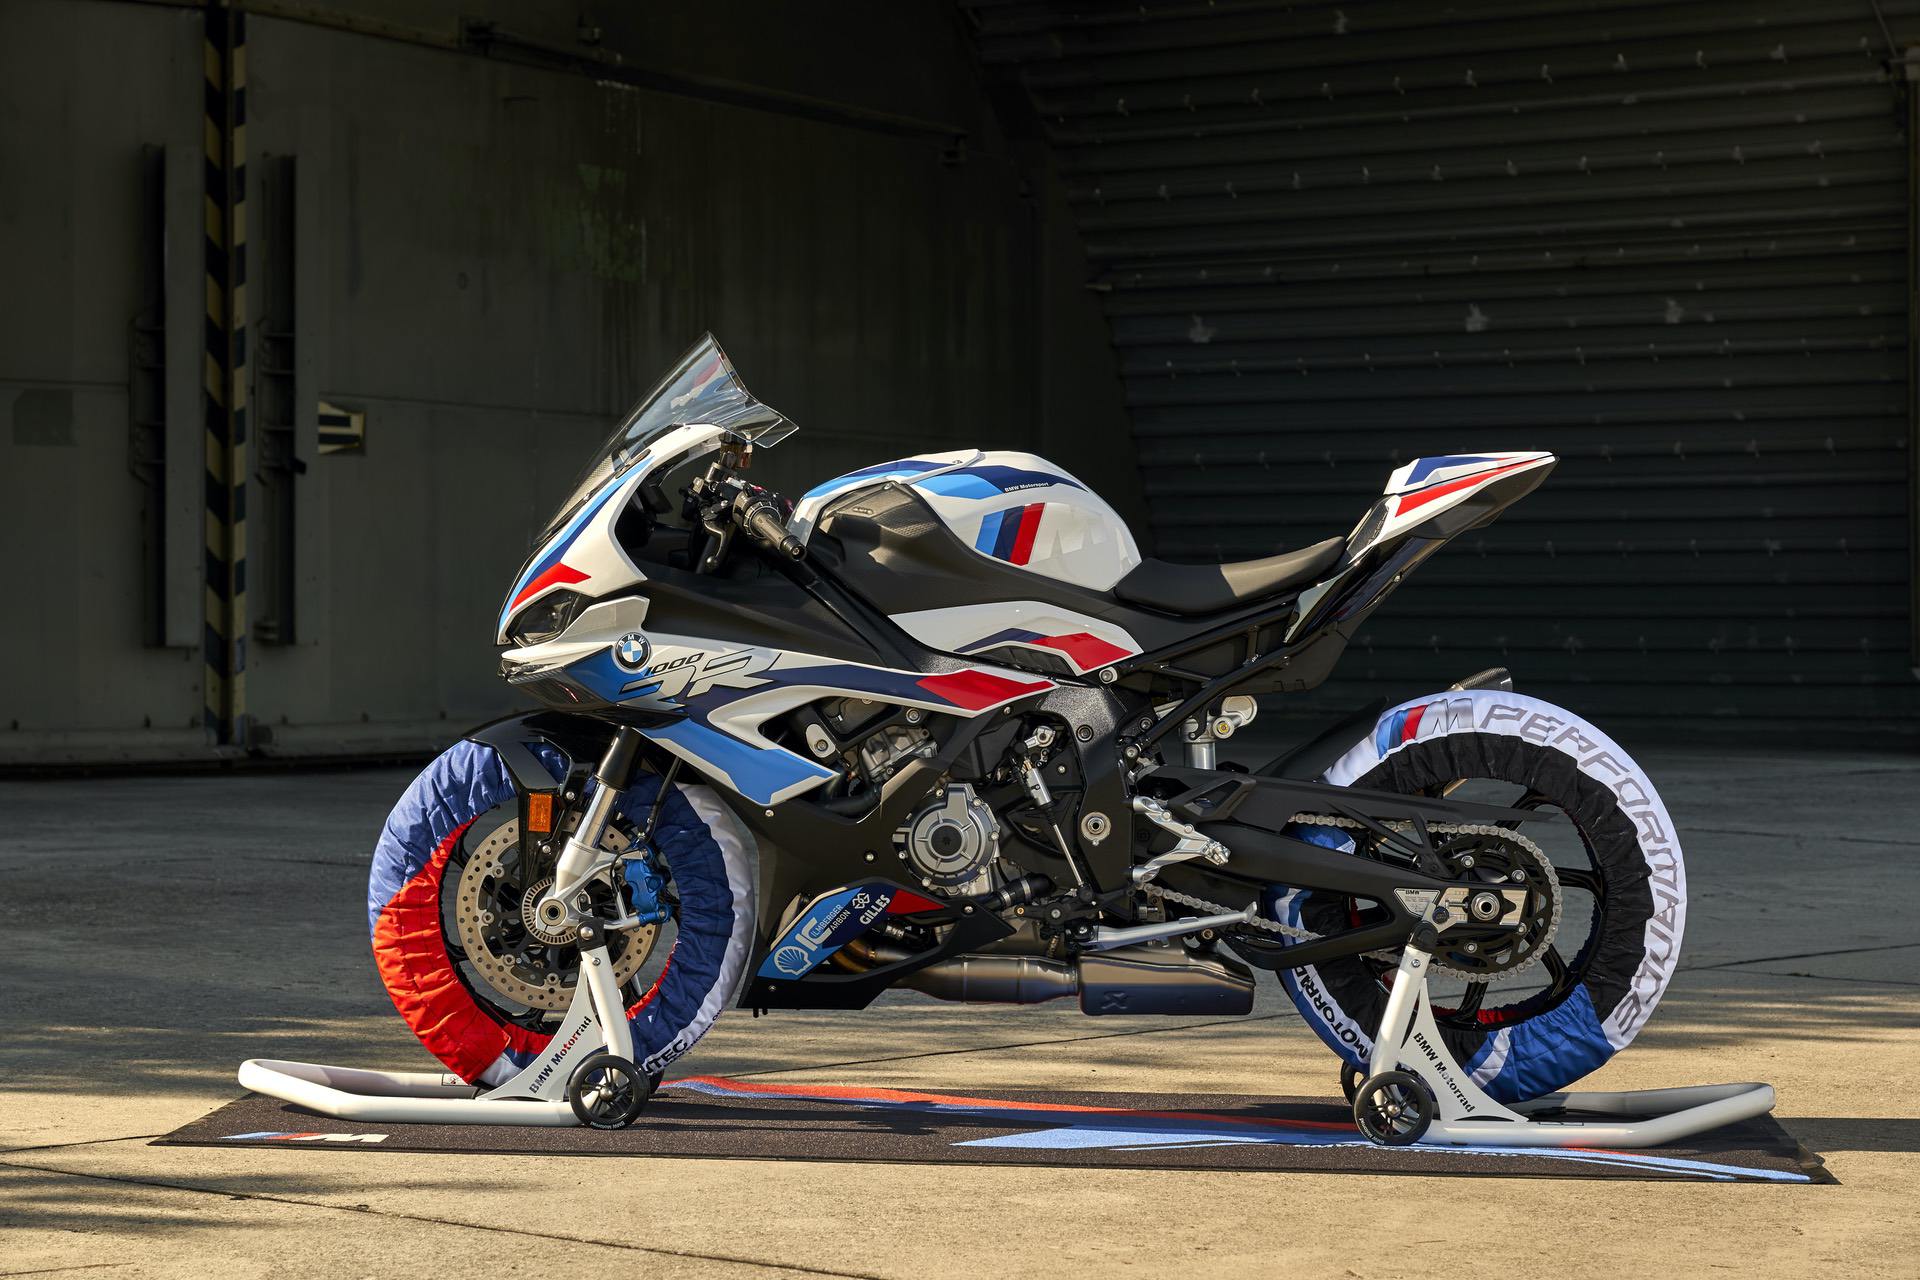 All You Need To Know About The BMW M 1000 RR VIDEO